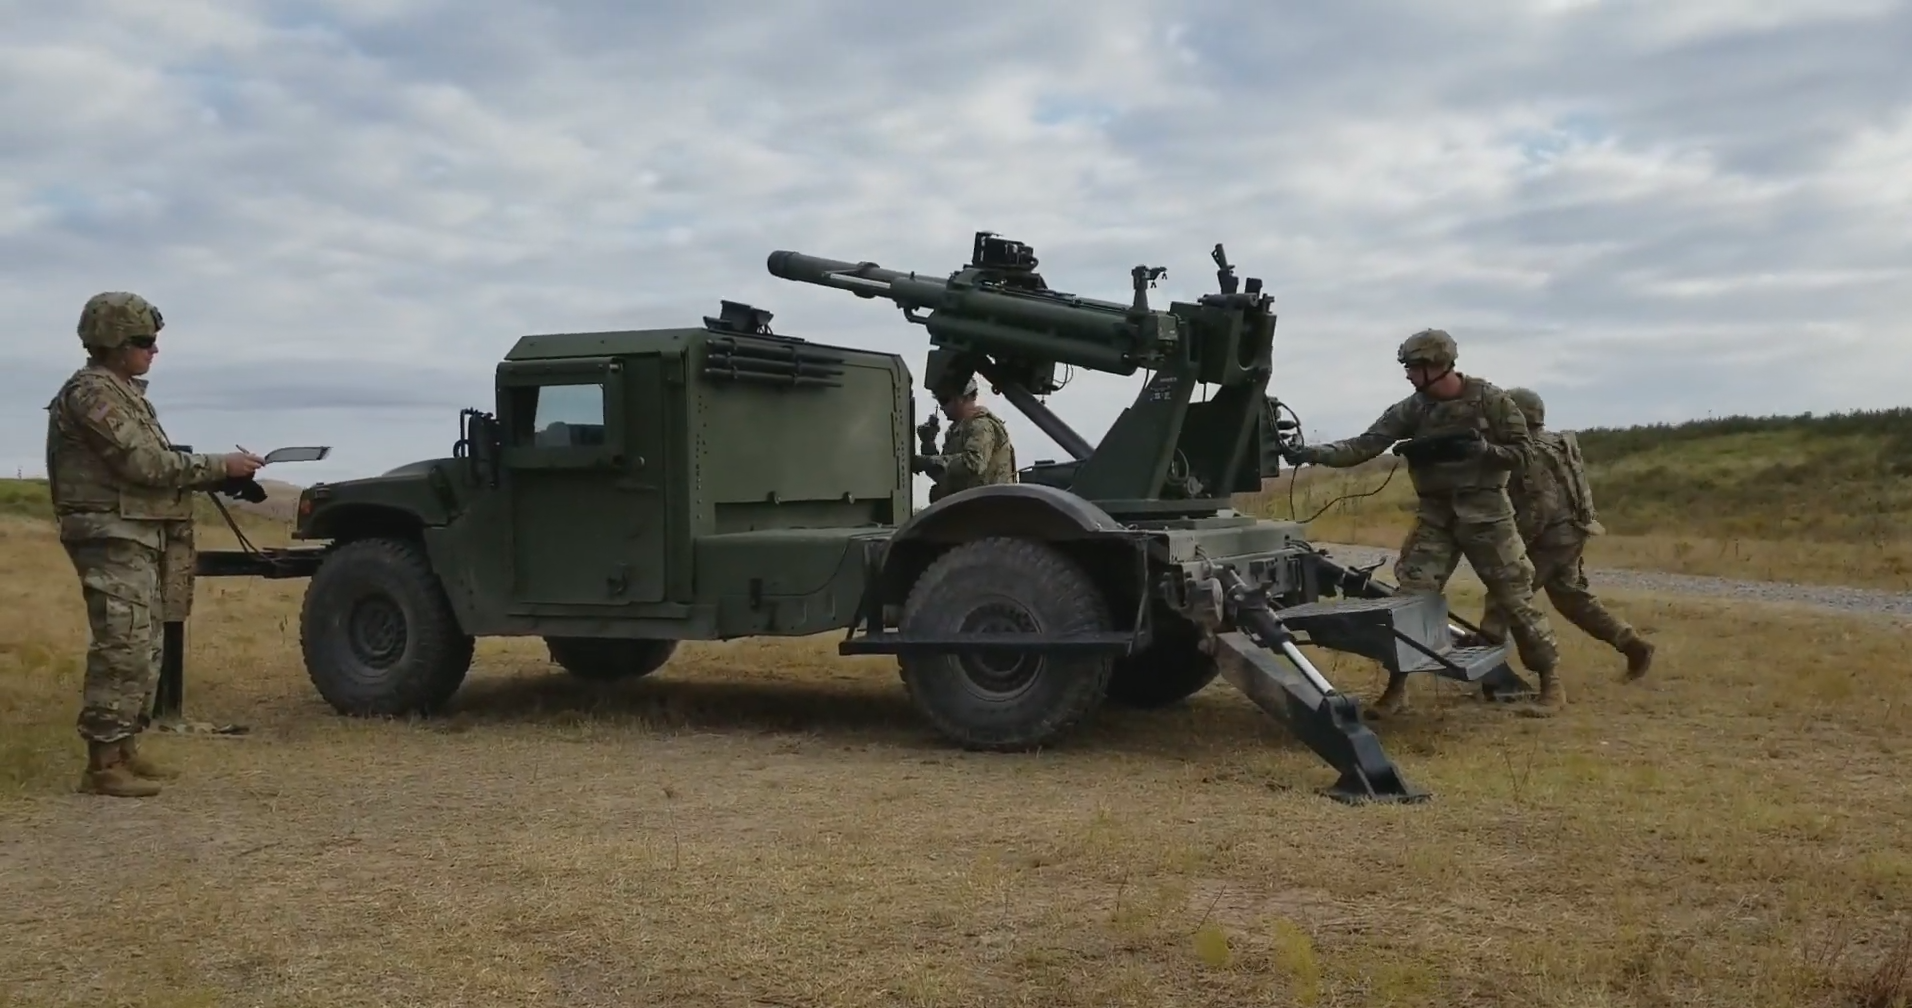 AM General shows CT-2 Hawkeye mobile howitzer system based on Humvee armored vehicle